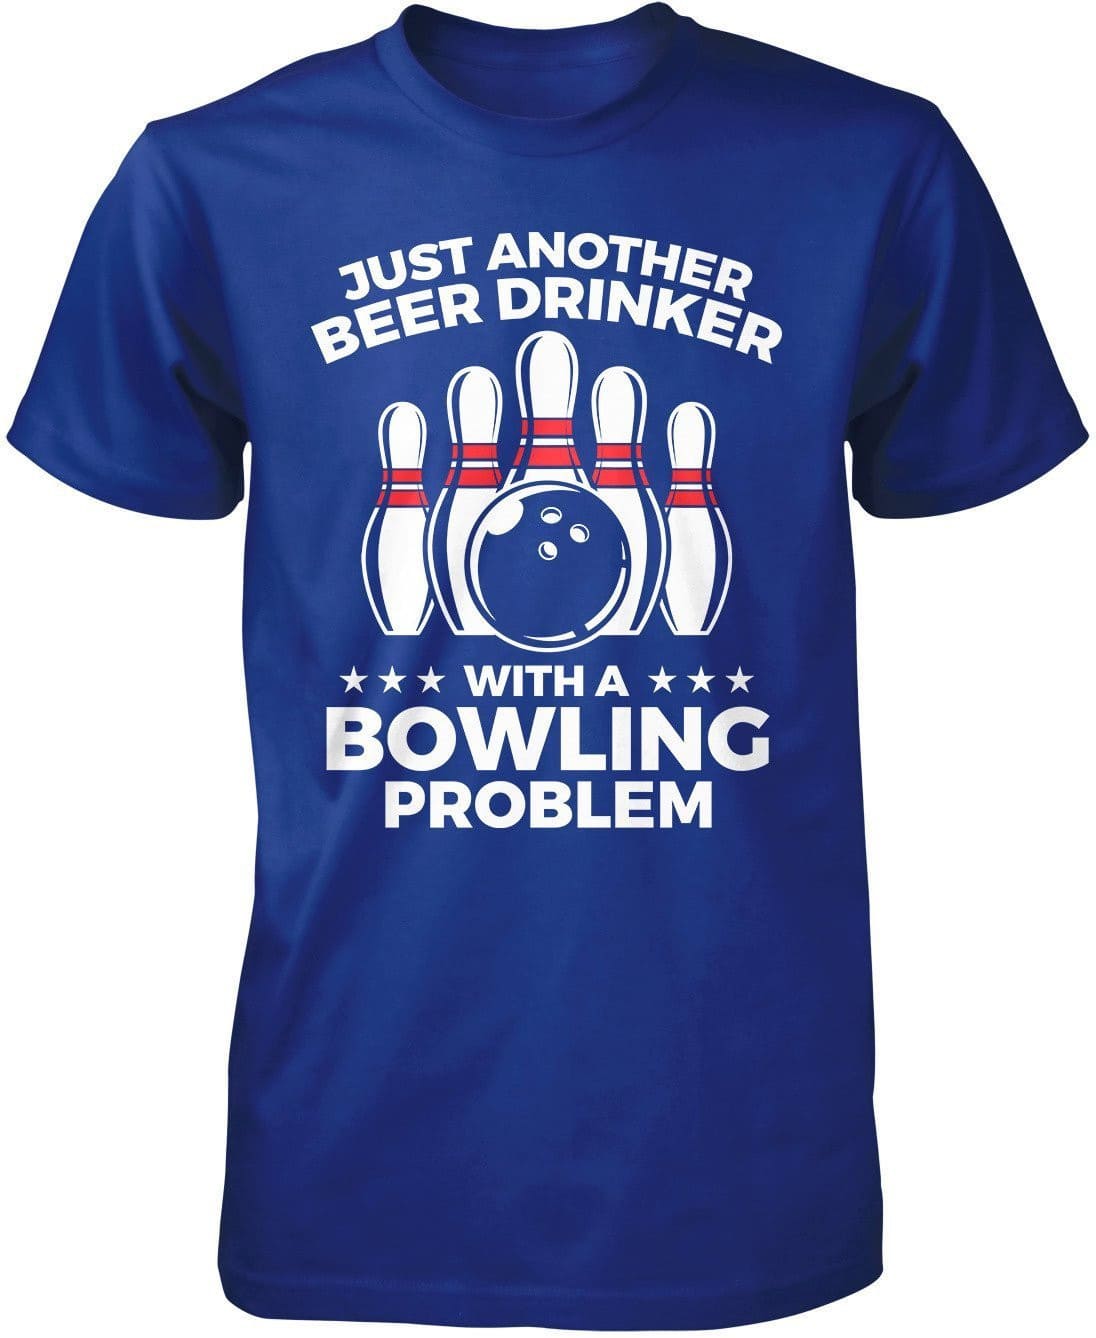 Beer Drinker with a Bowling Problem T-Shirt